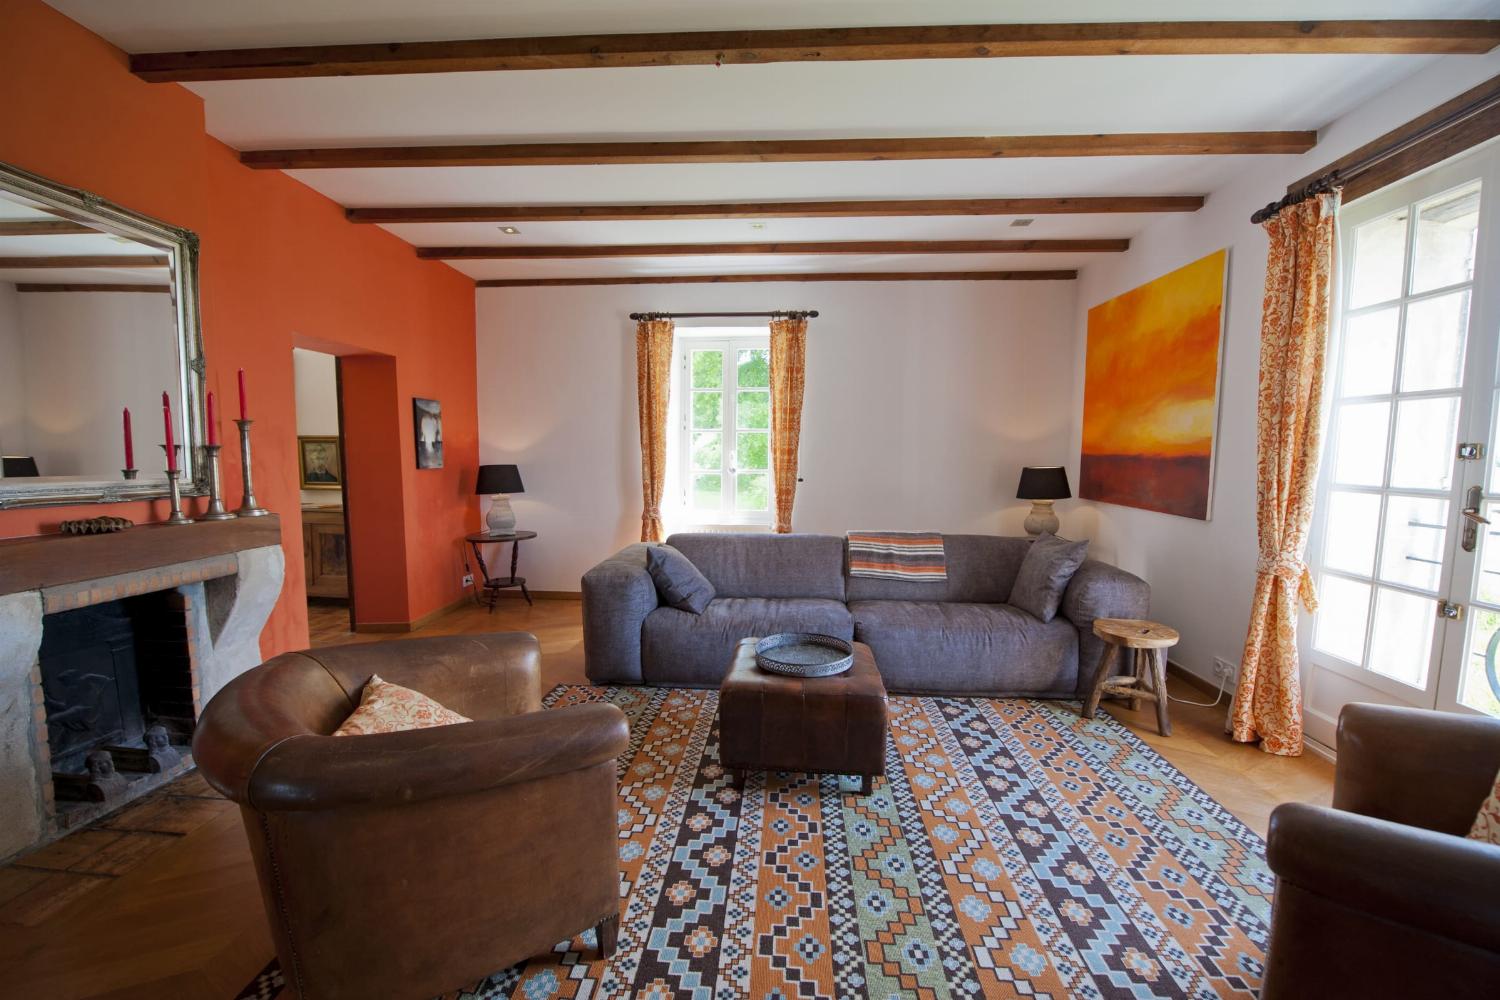 Living room | Rental accommodation in Nouvelle-Aquitaine